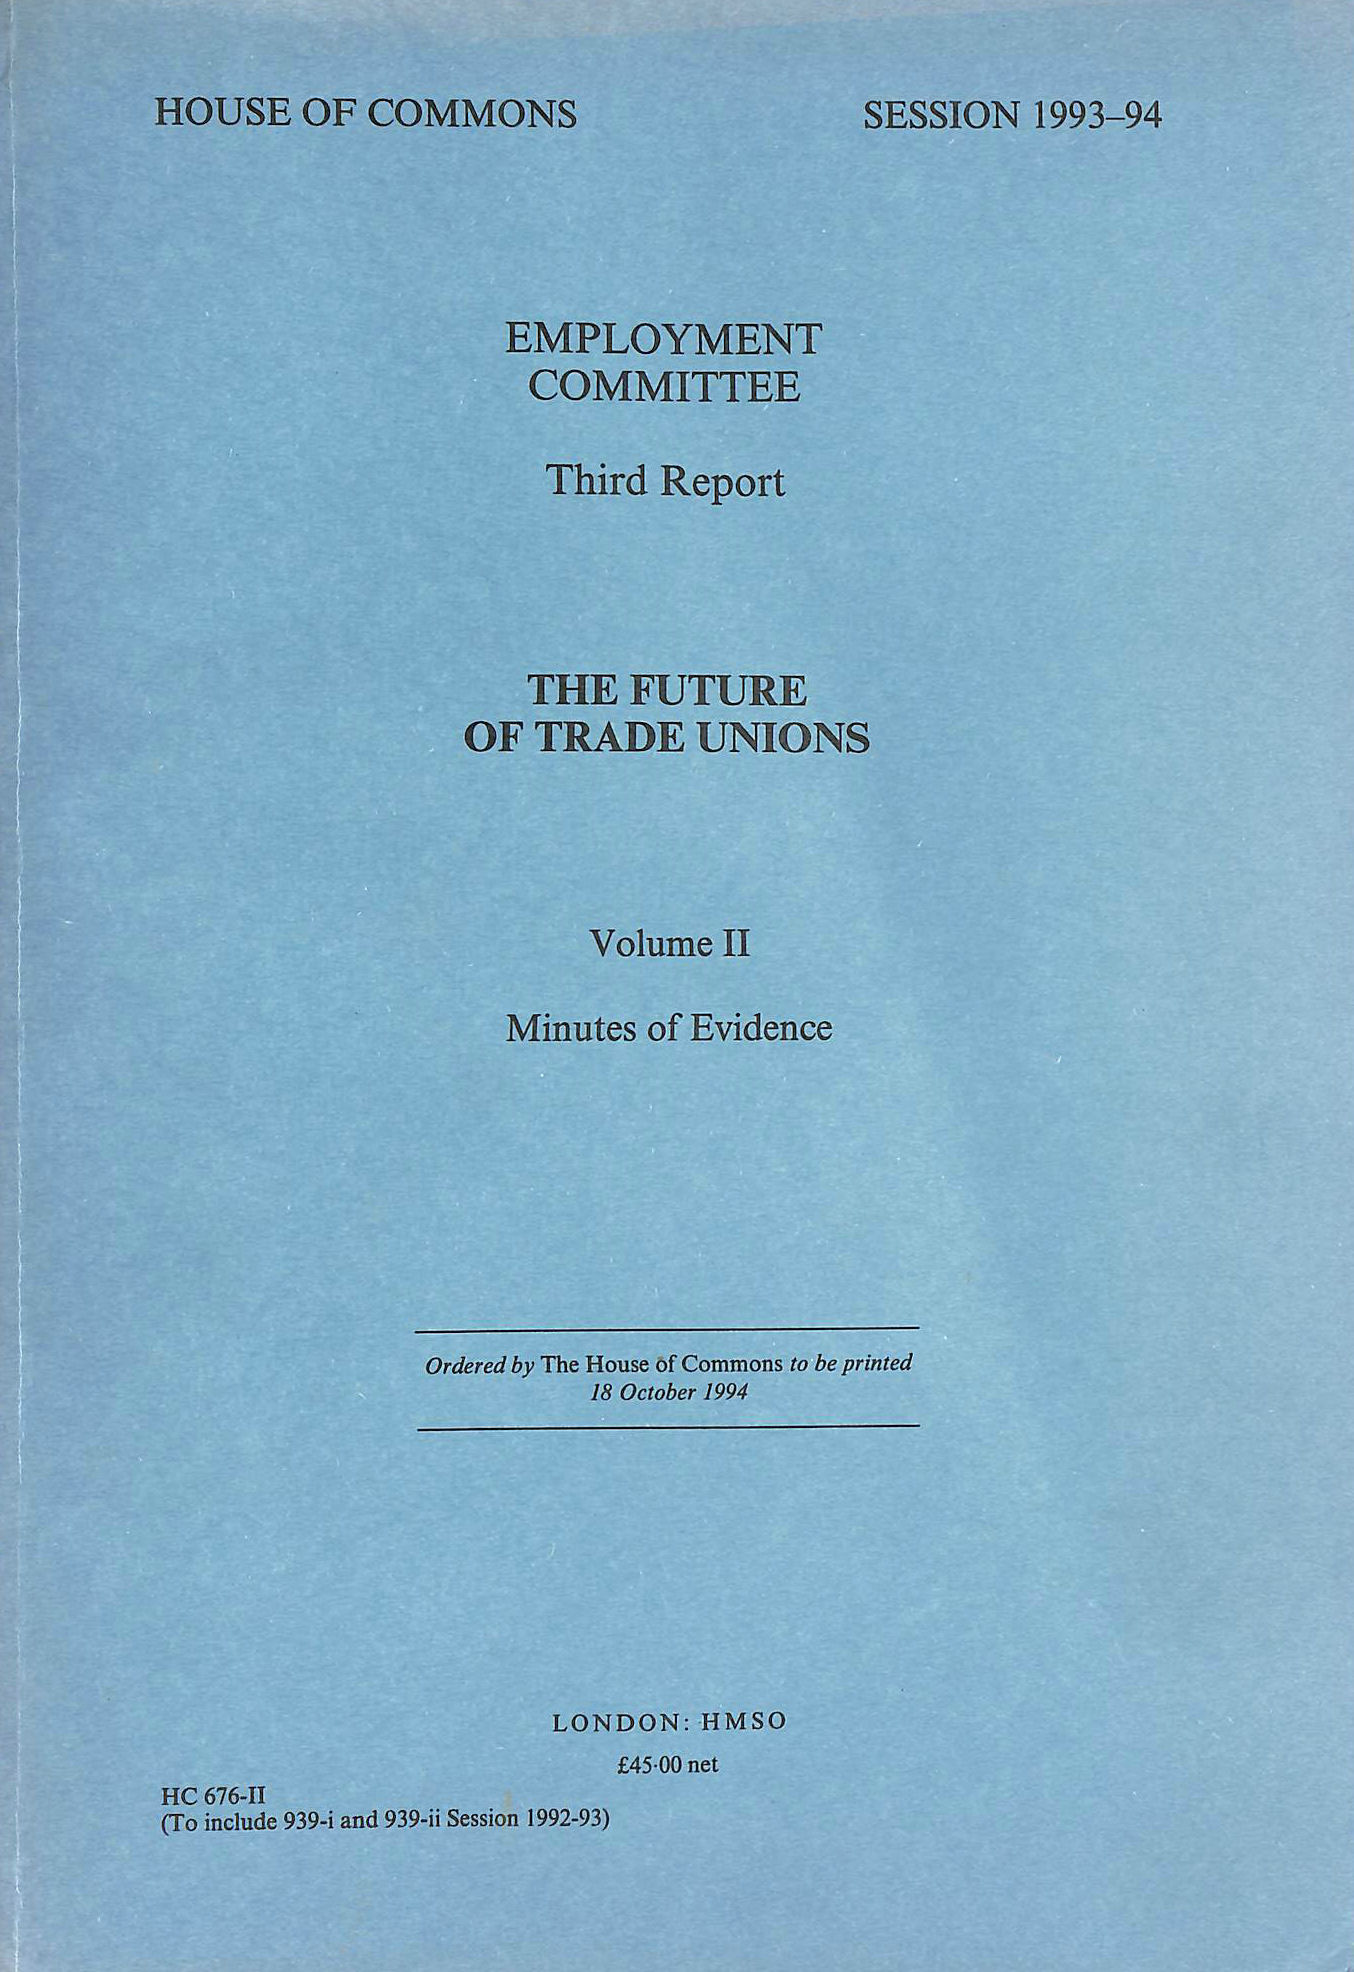 HOUSE OF COMMONS EMPLOYMENT COMMITTEE - The Future of Trade Unions Report Volume II